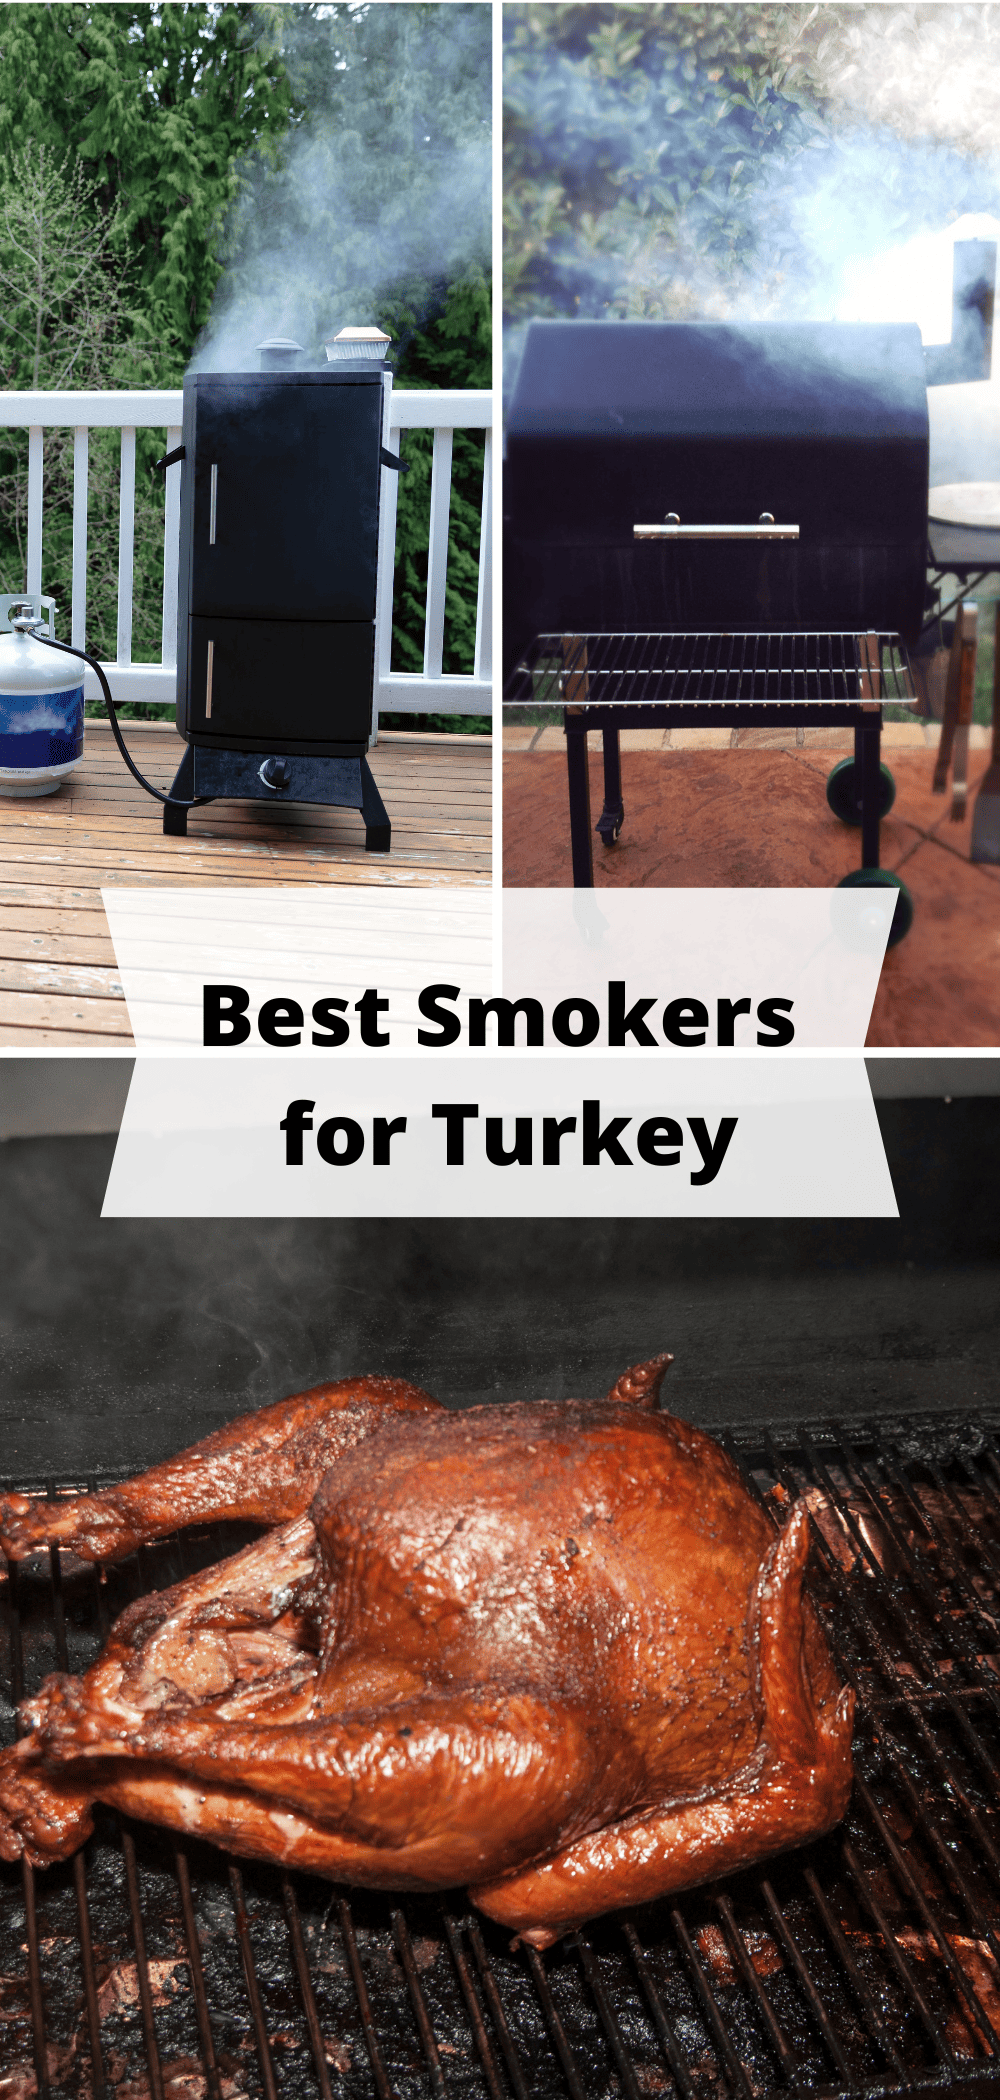 Two different types of charcoal and pellet smokers plus a smoked turkey ready on the grate.